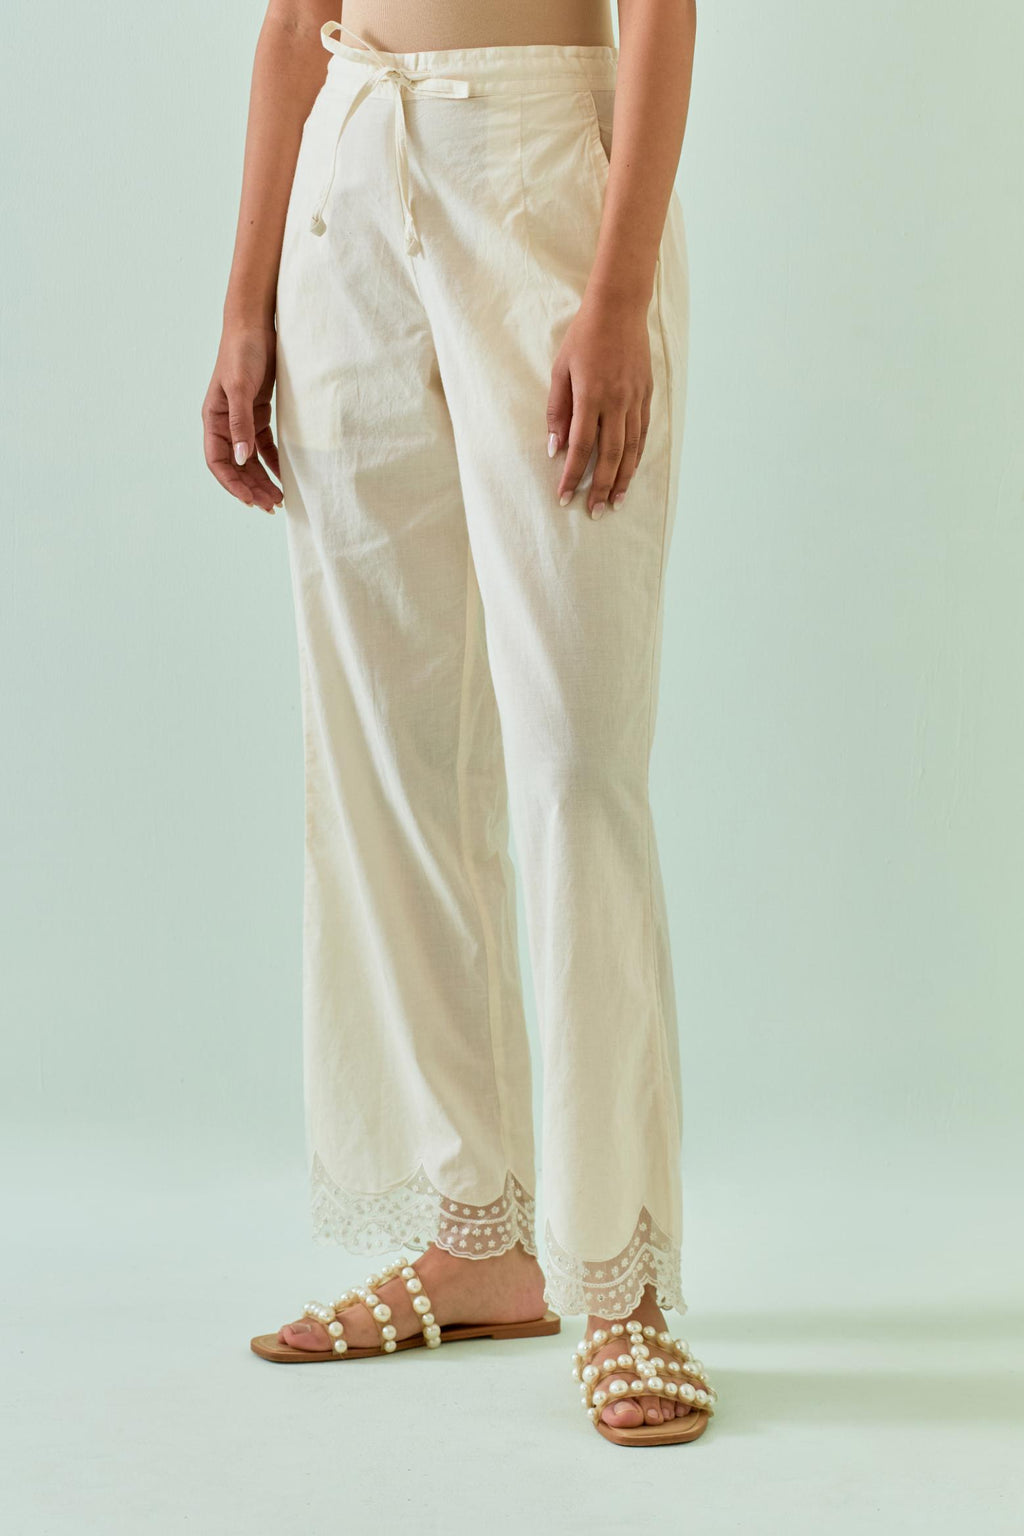 Off white straight pants with scalloped embroidery at bottom hem.